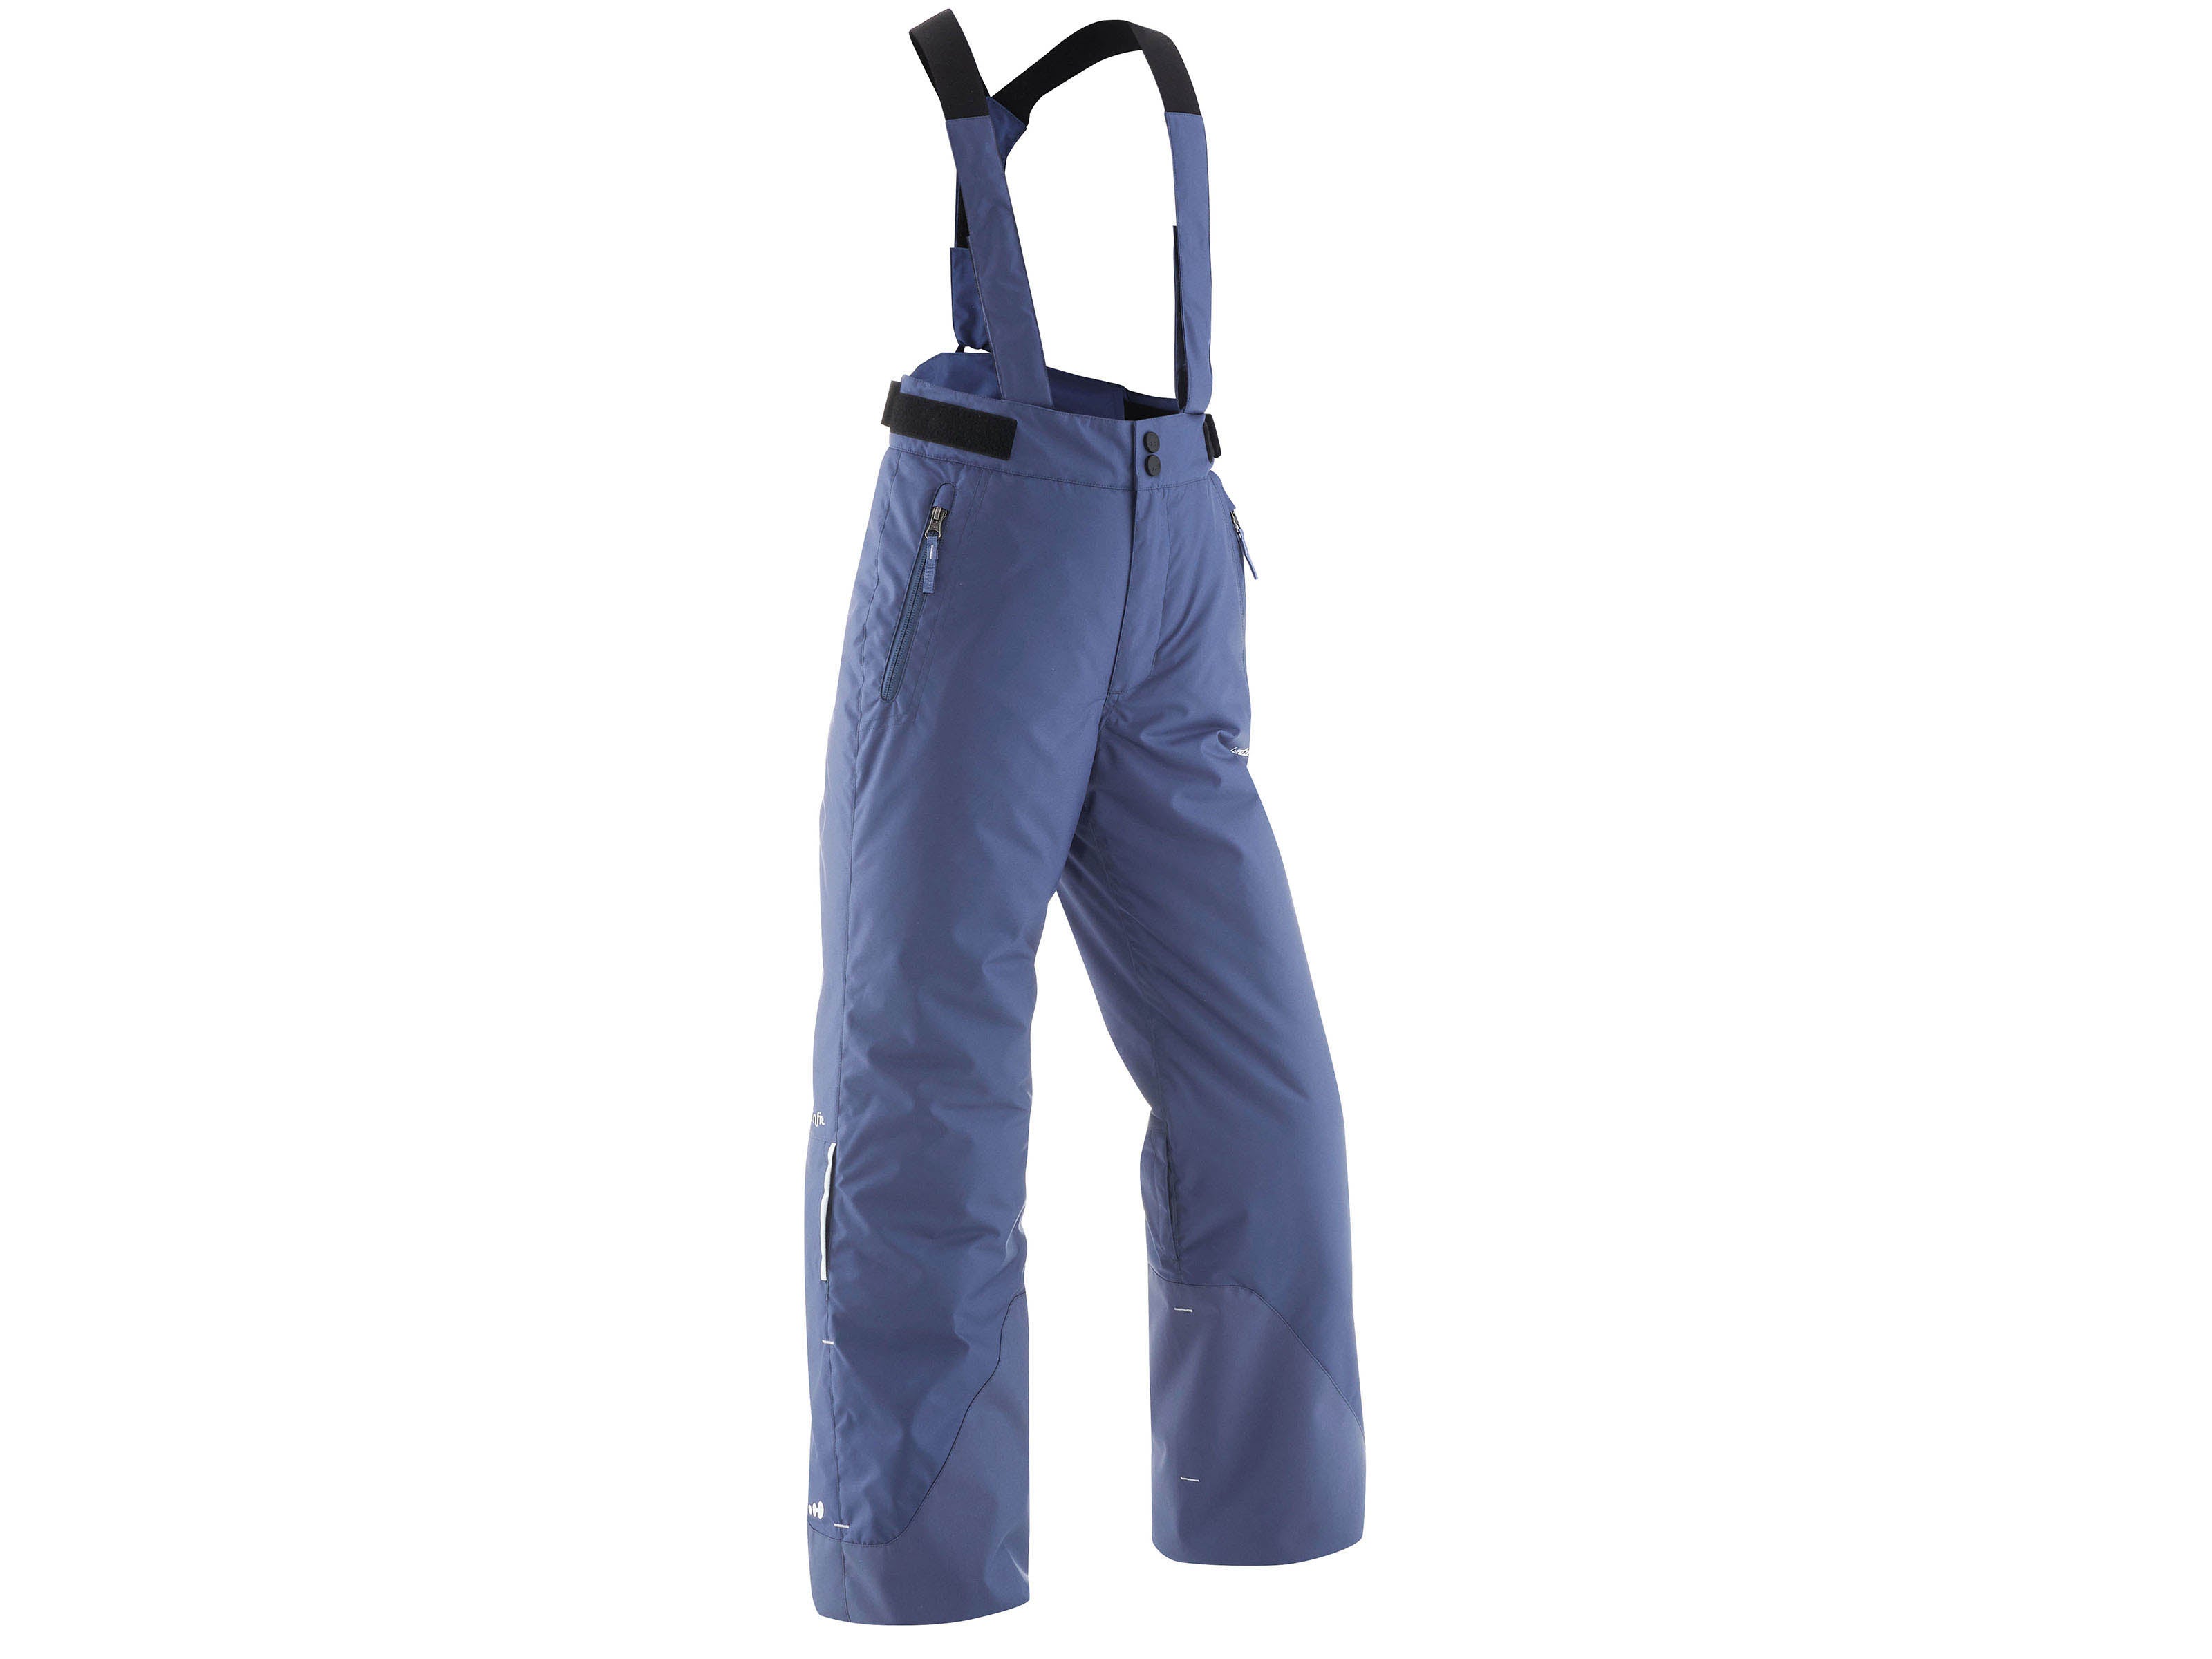 New Boden Ski Pants 2-3yrs All Weather Waterproof Trousers Blue 98cms Salopettes 